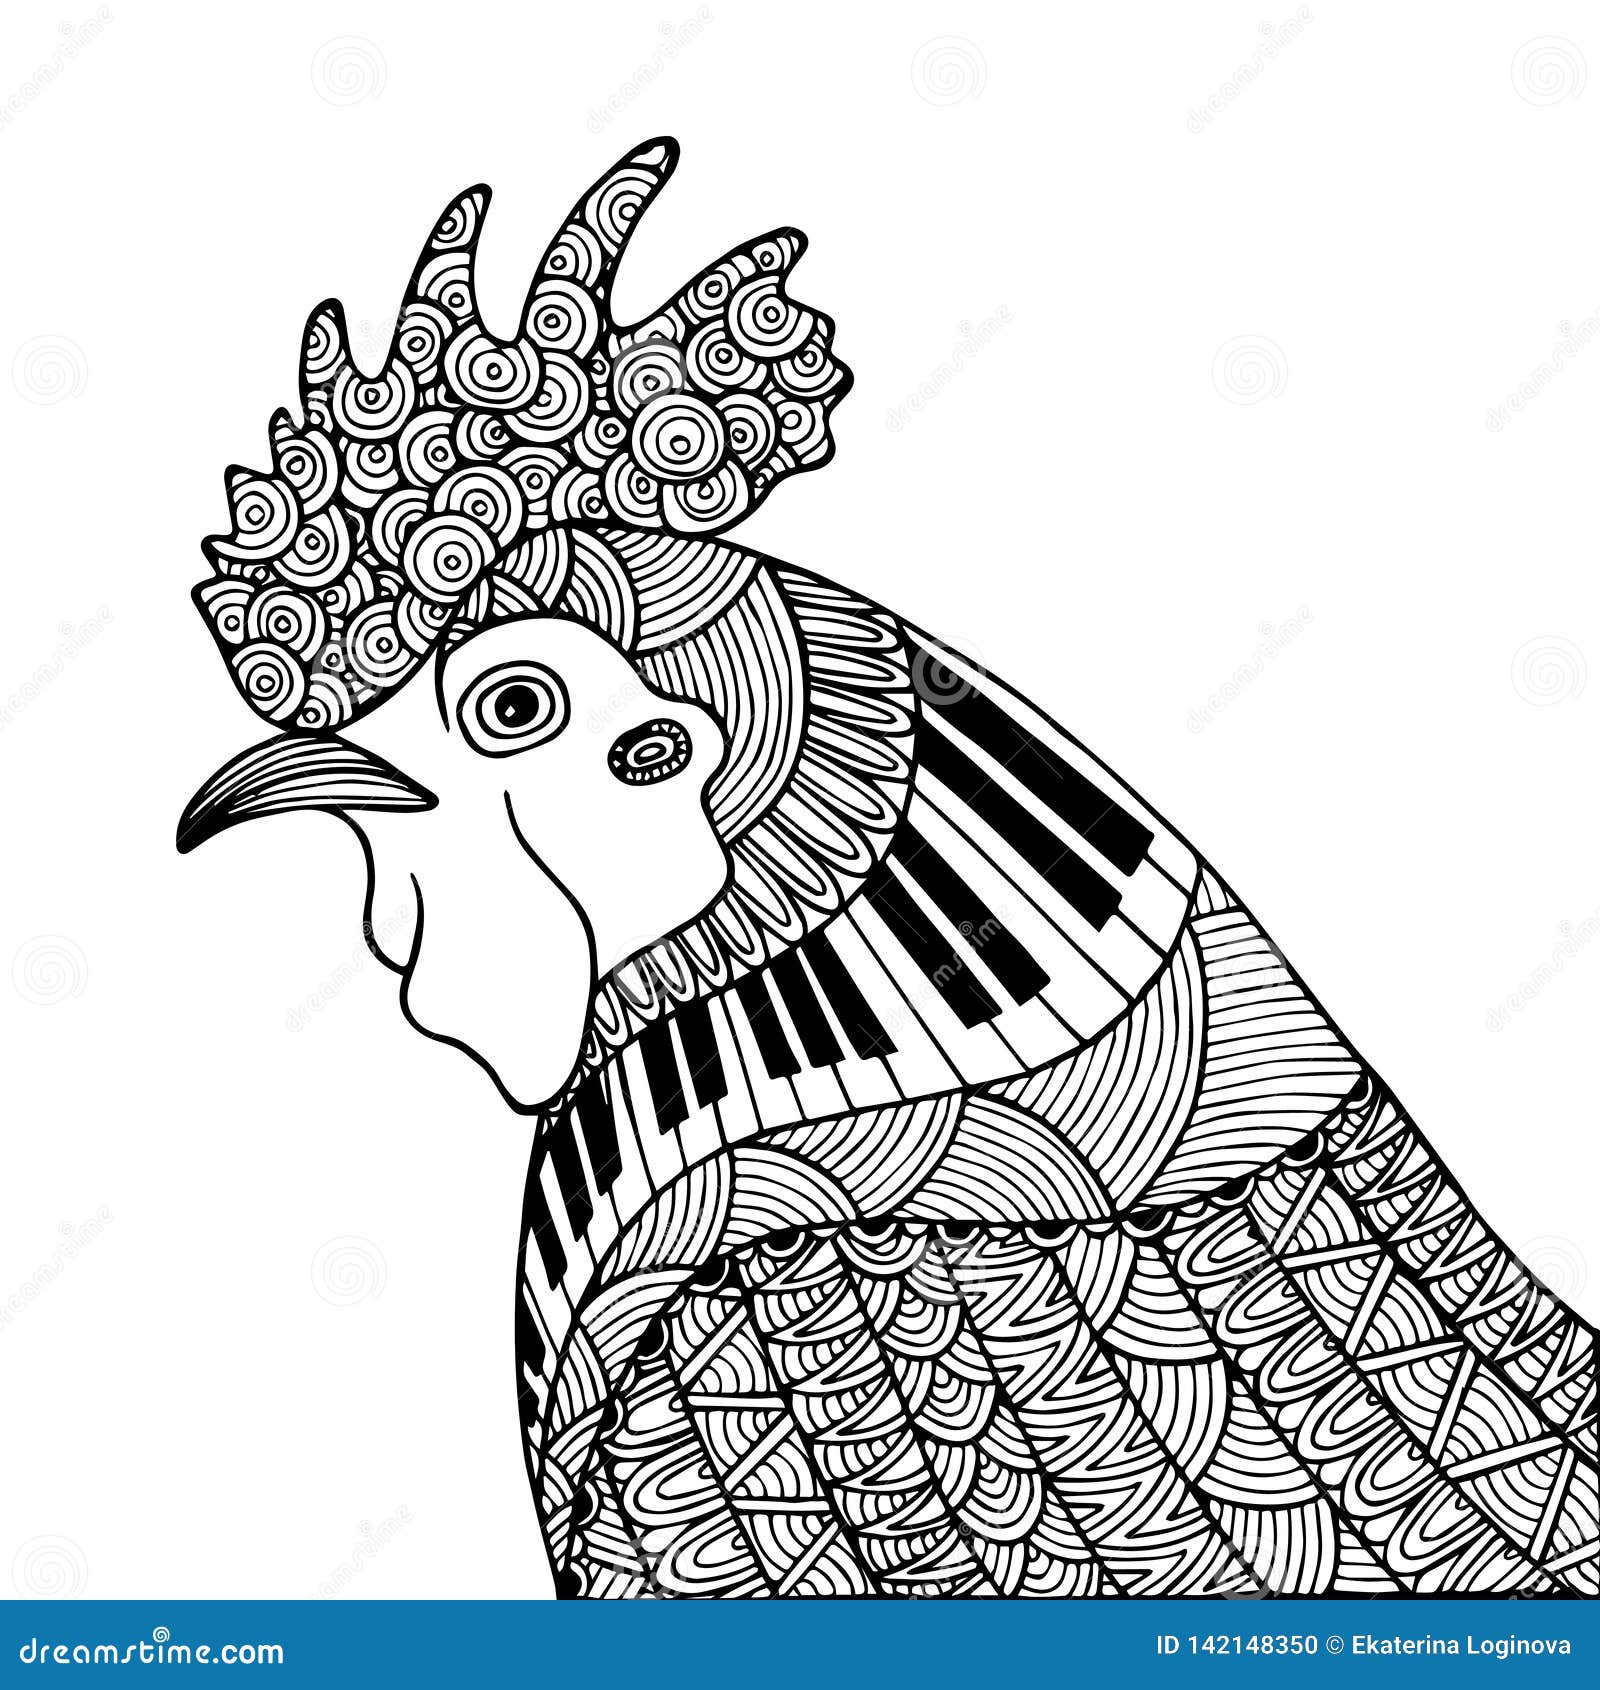 Decorative Zentangle Rooster Stock Vector - Illustration of decorative ...